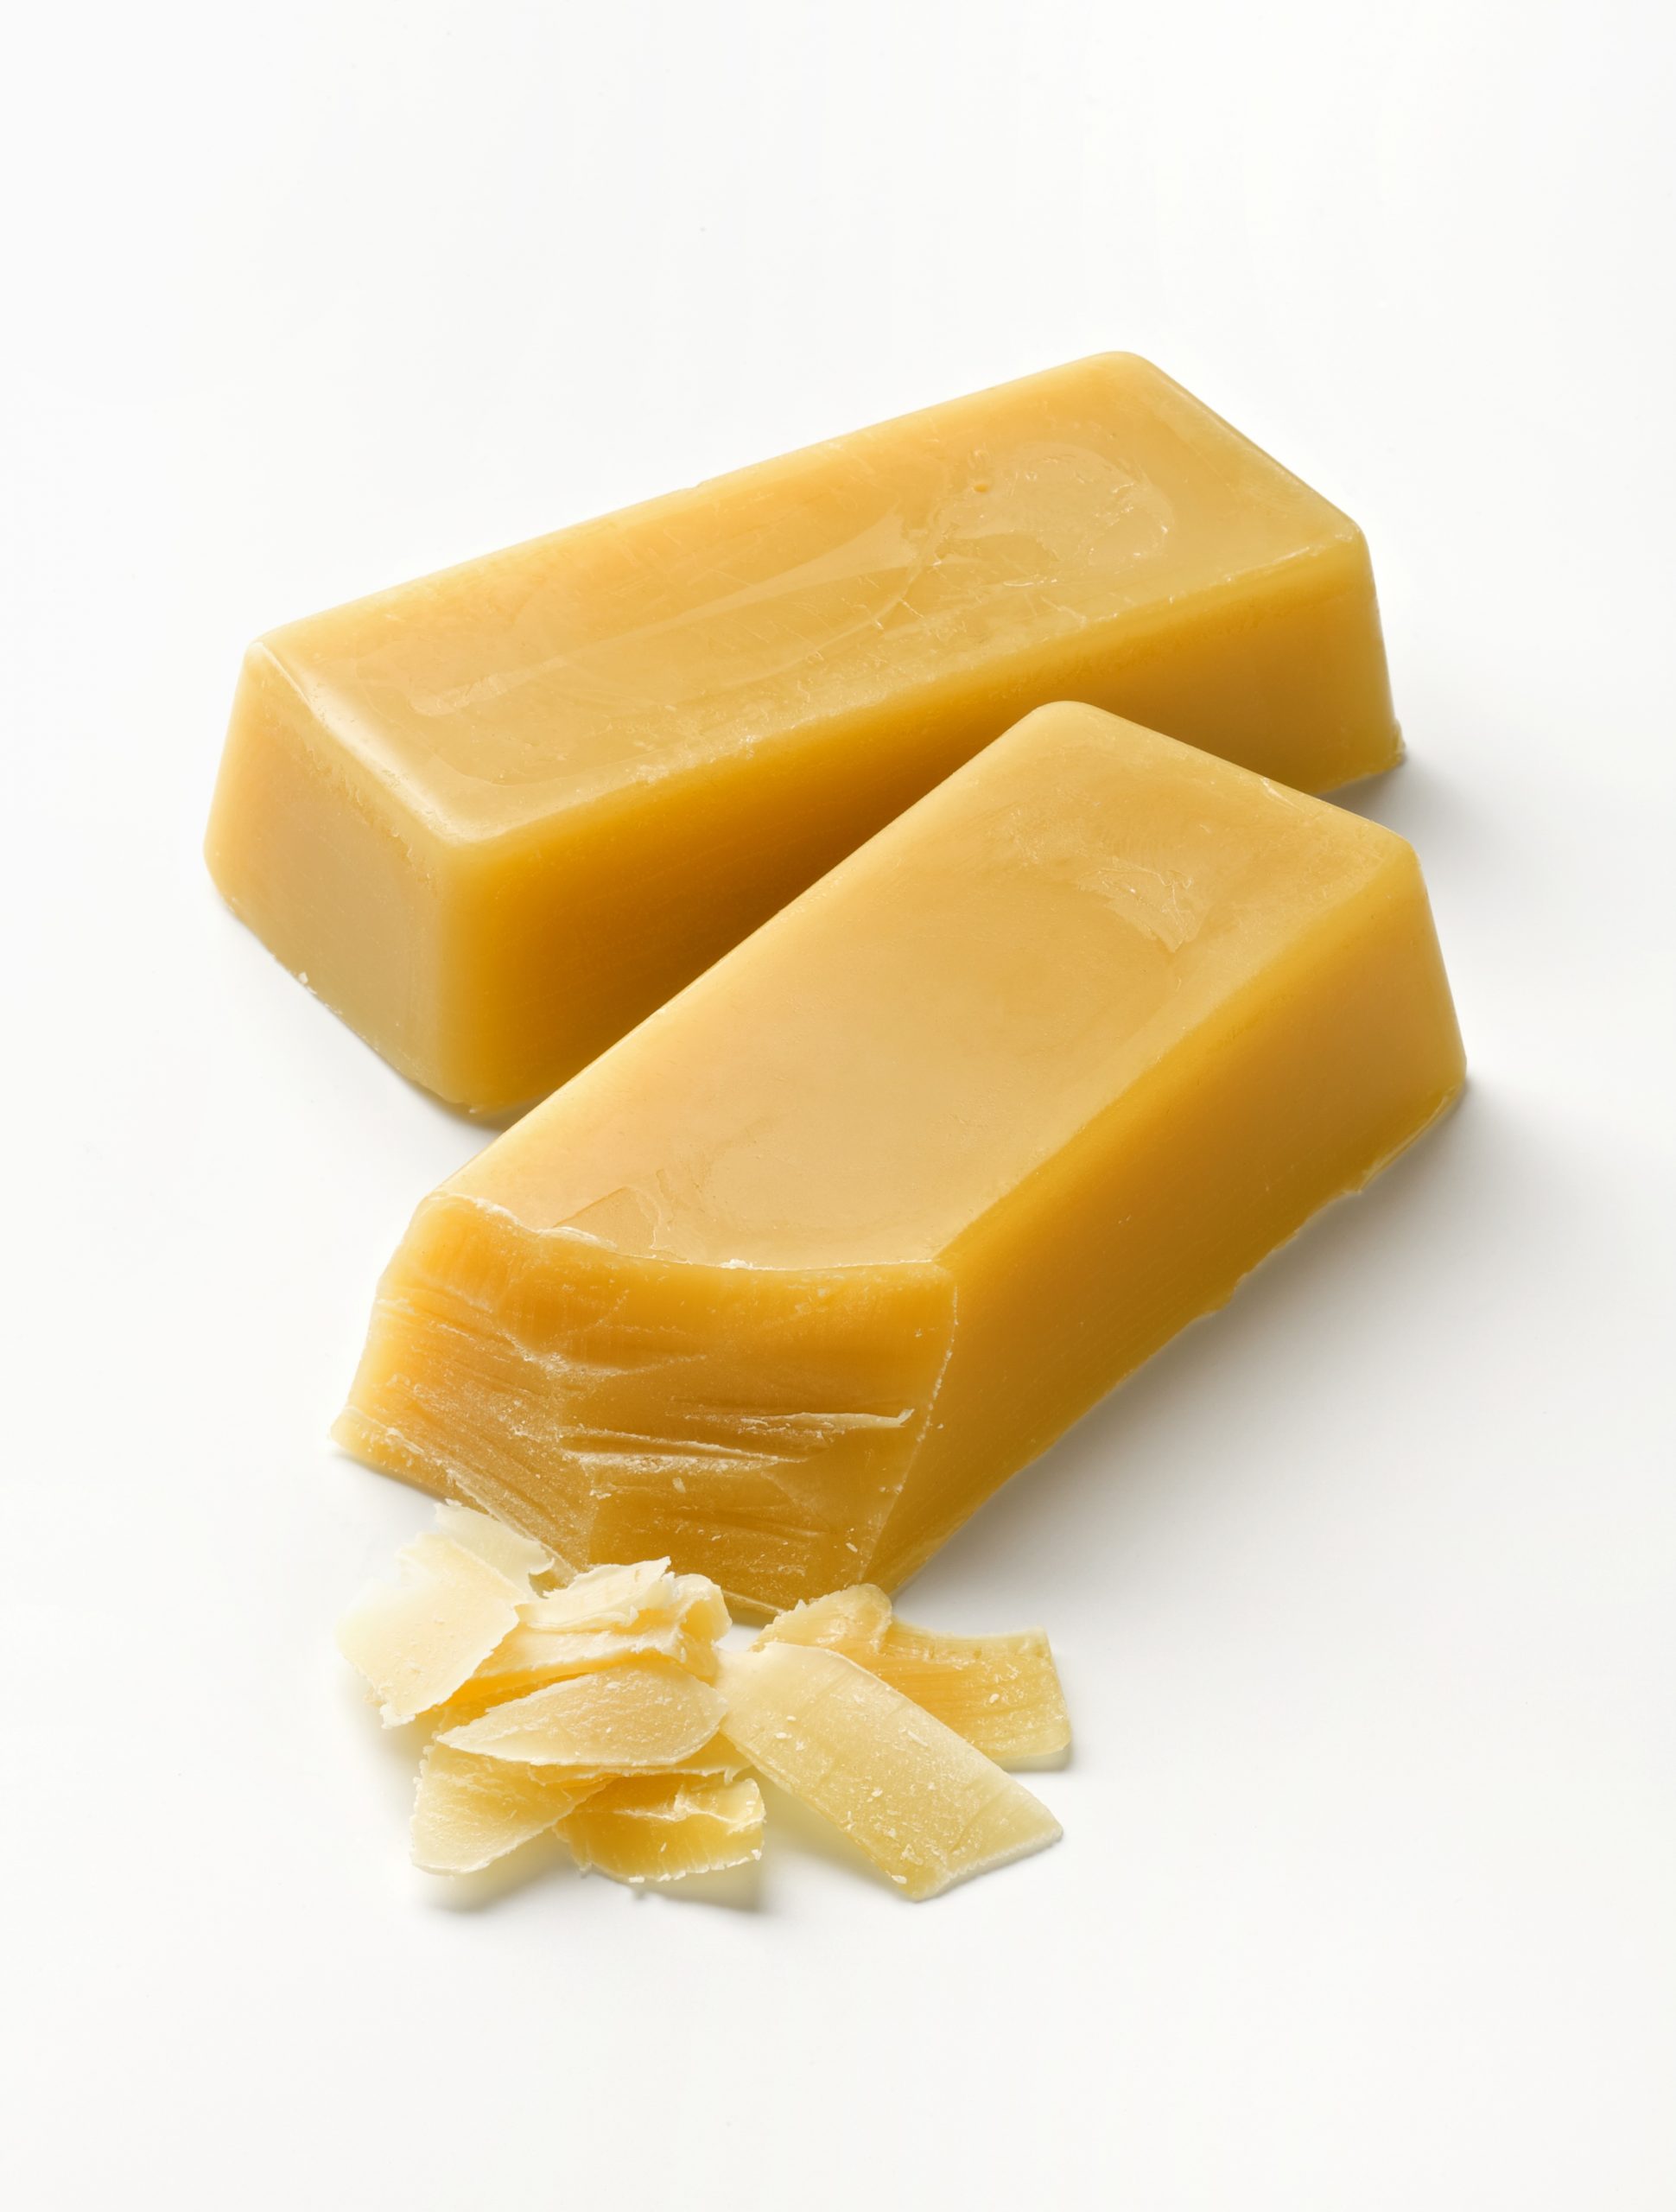 Beeswax: Not Just for Candles